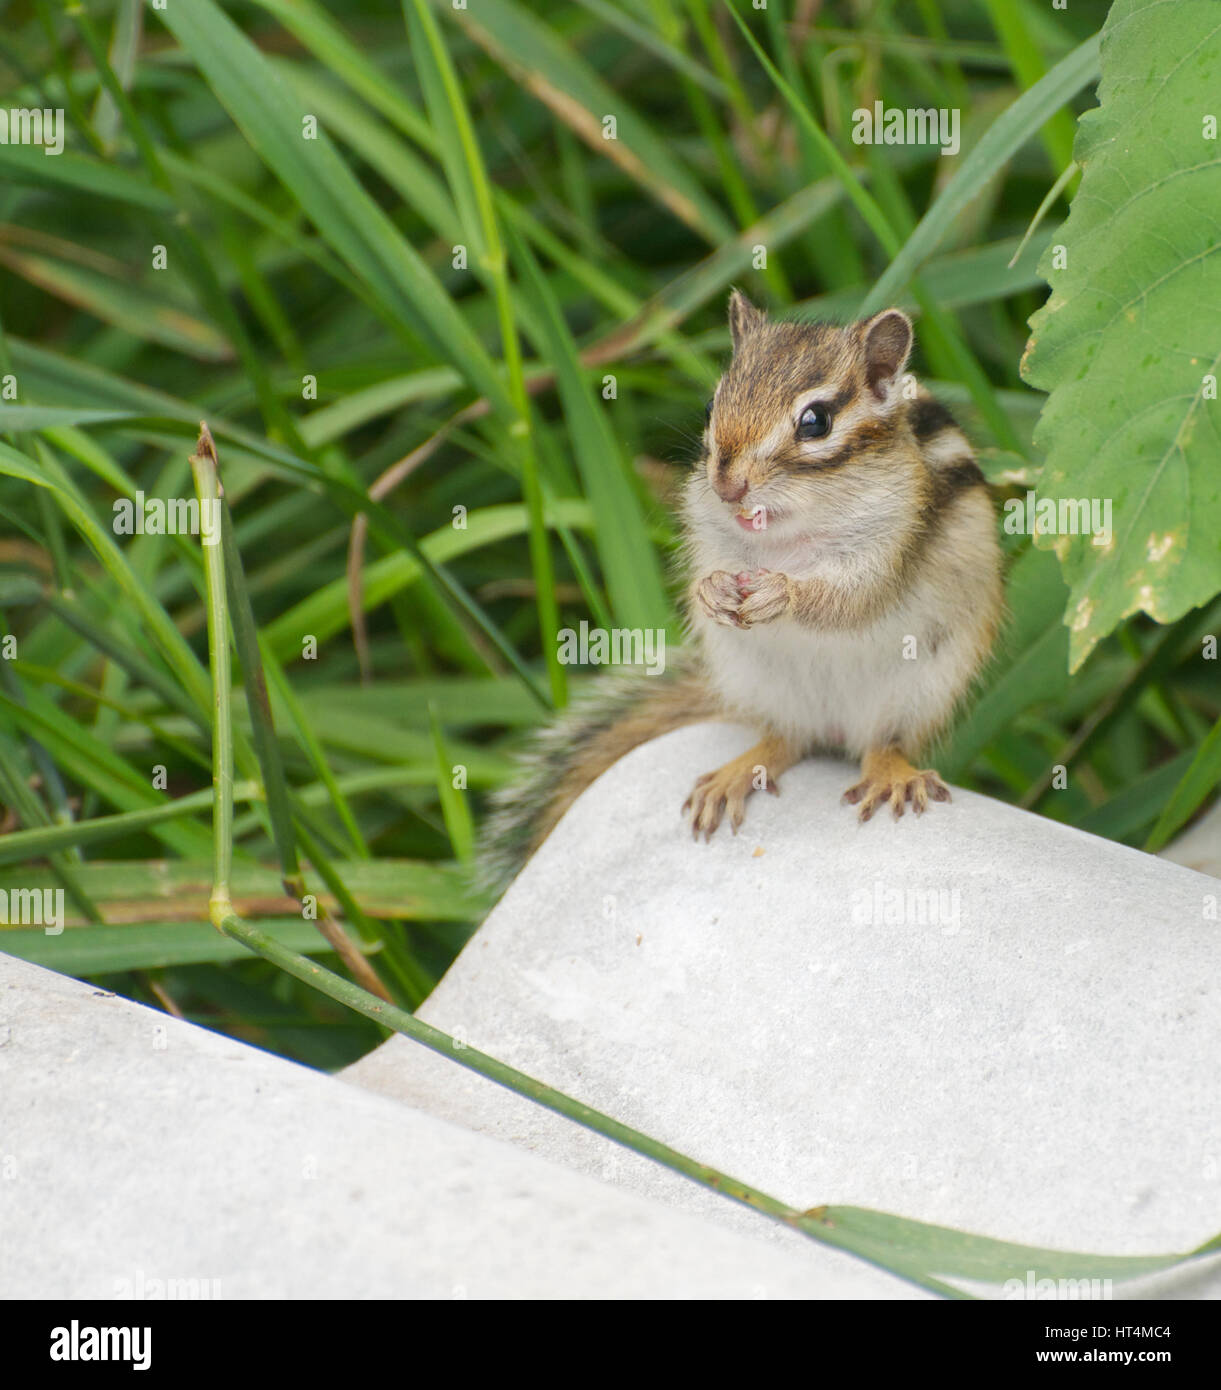 Corrugated Asbestos Roof panels with Siberian Chipmunk Stock Photo